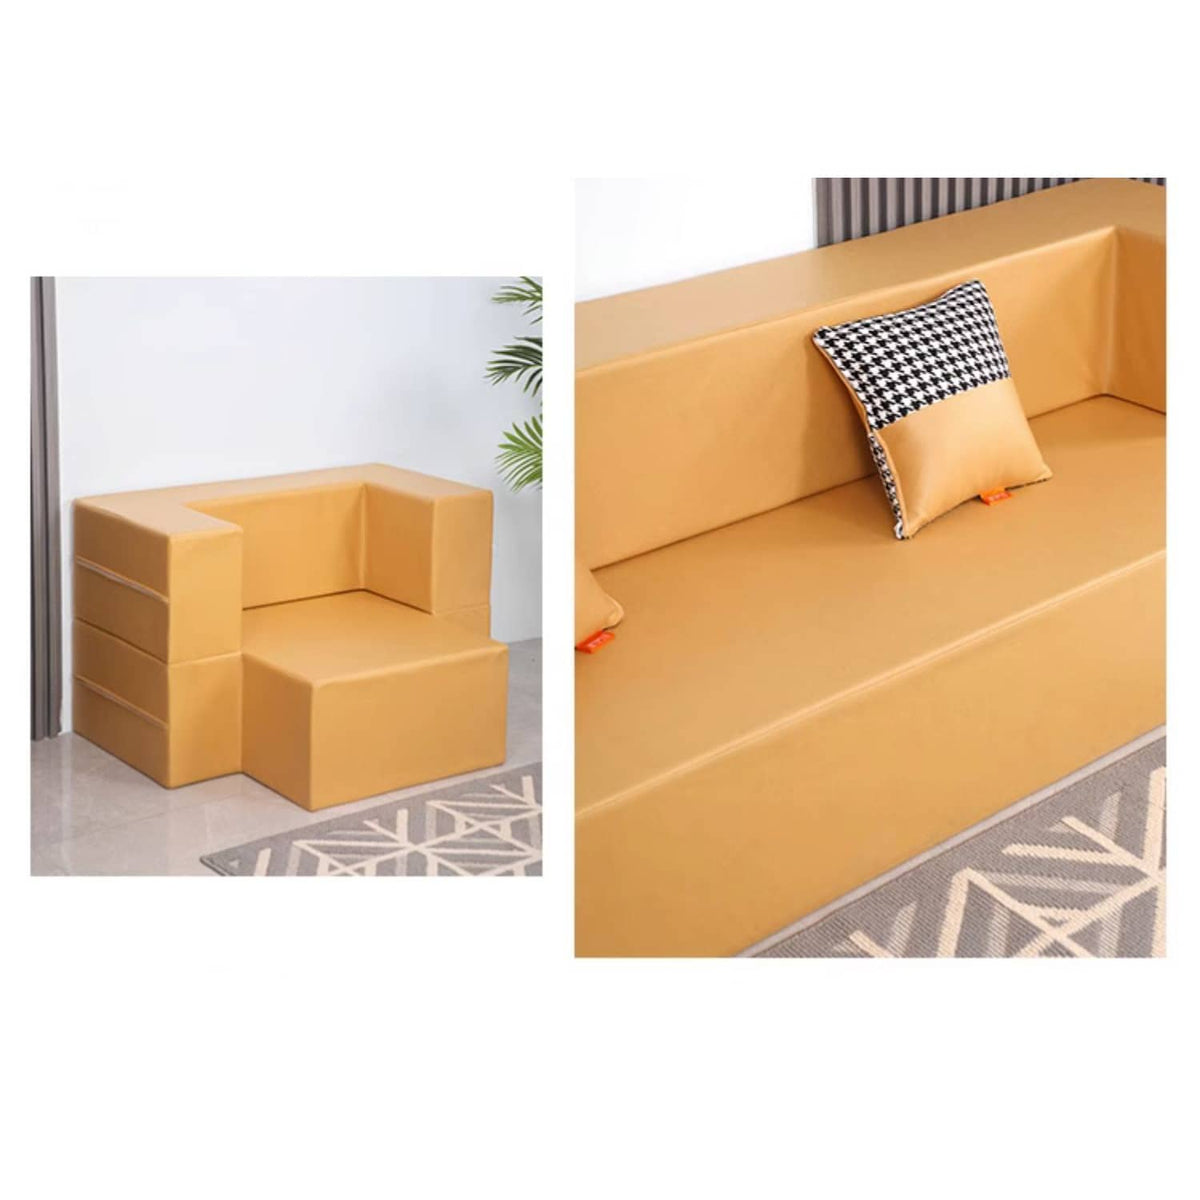 Stylish Yellow Orange Grey Leathaire Sofa Bed - Ultimate Comfort with Foam and Figure Cotton fcsnm-910